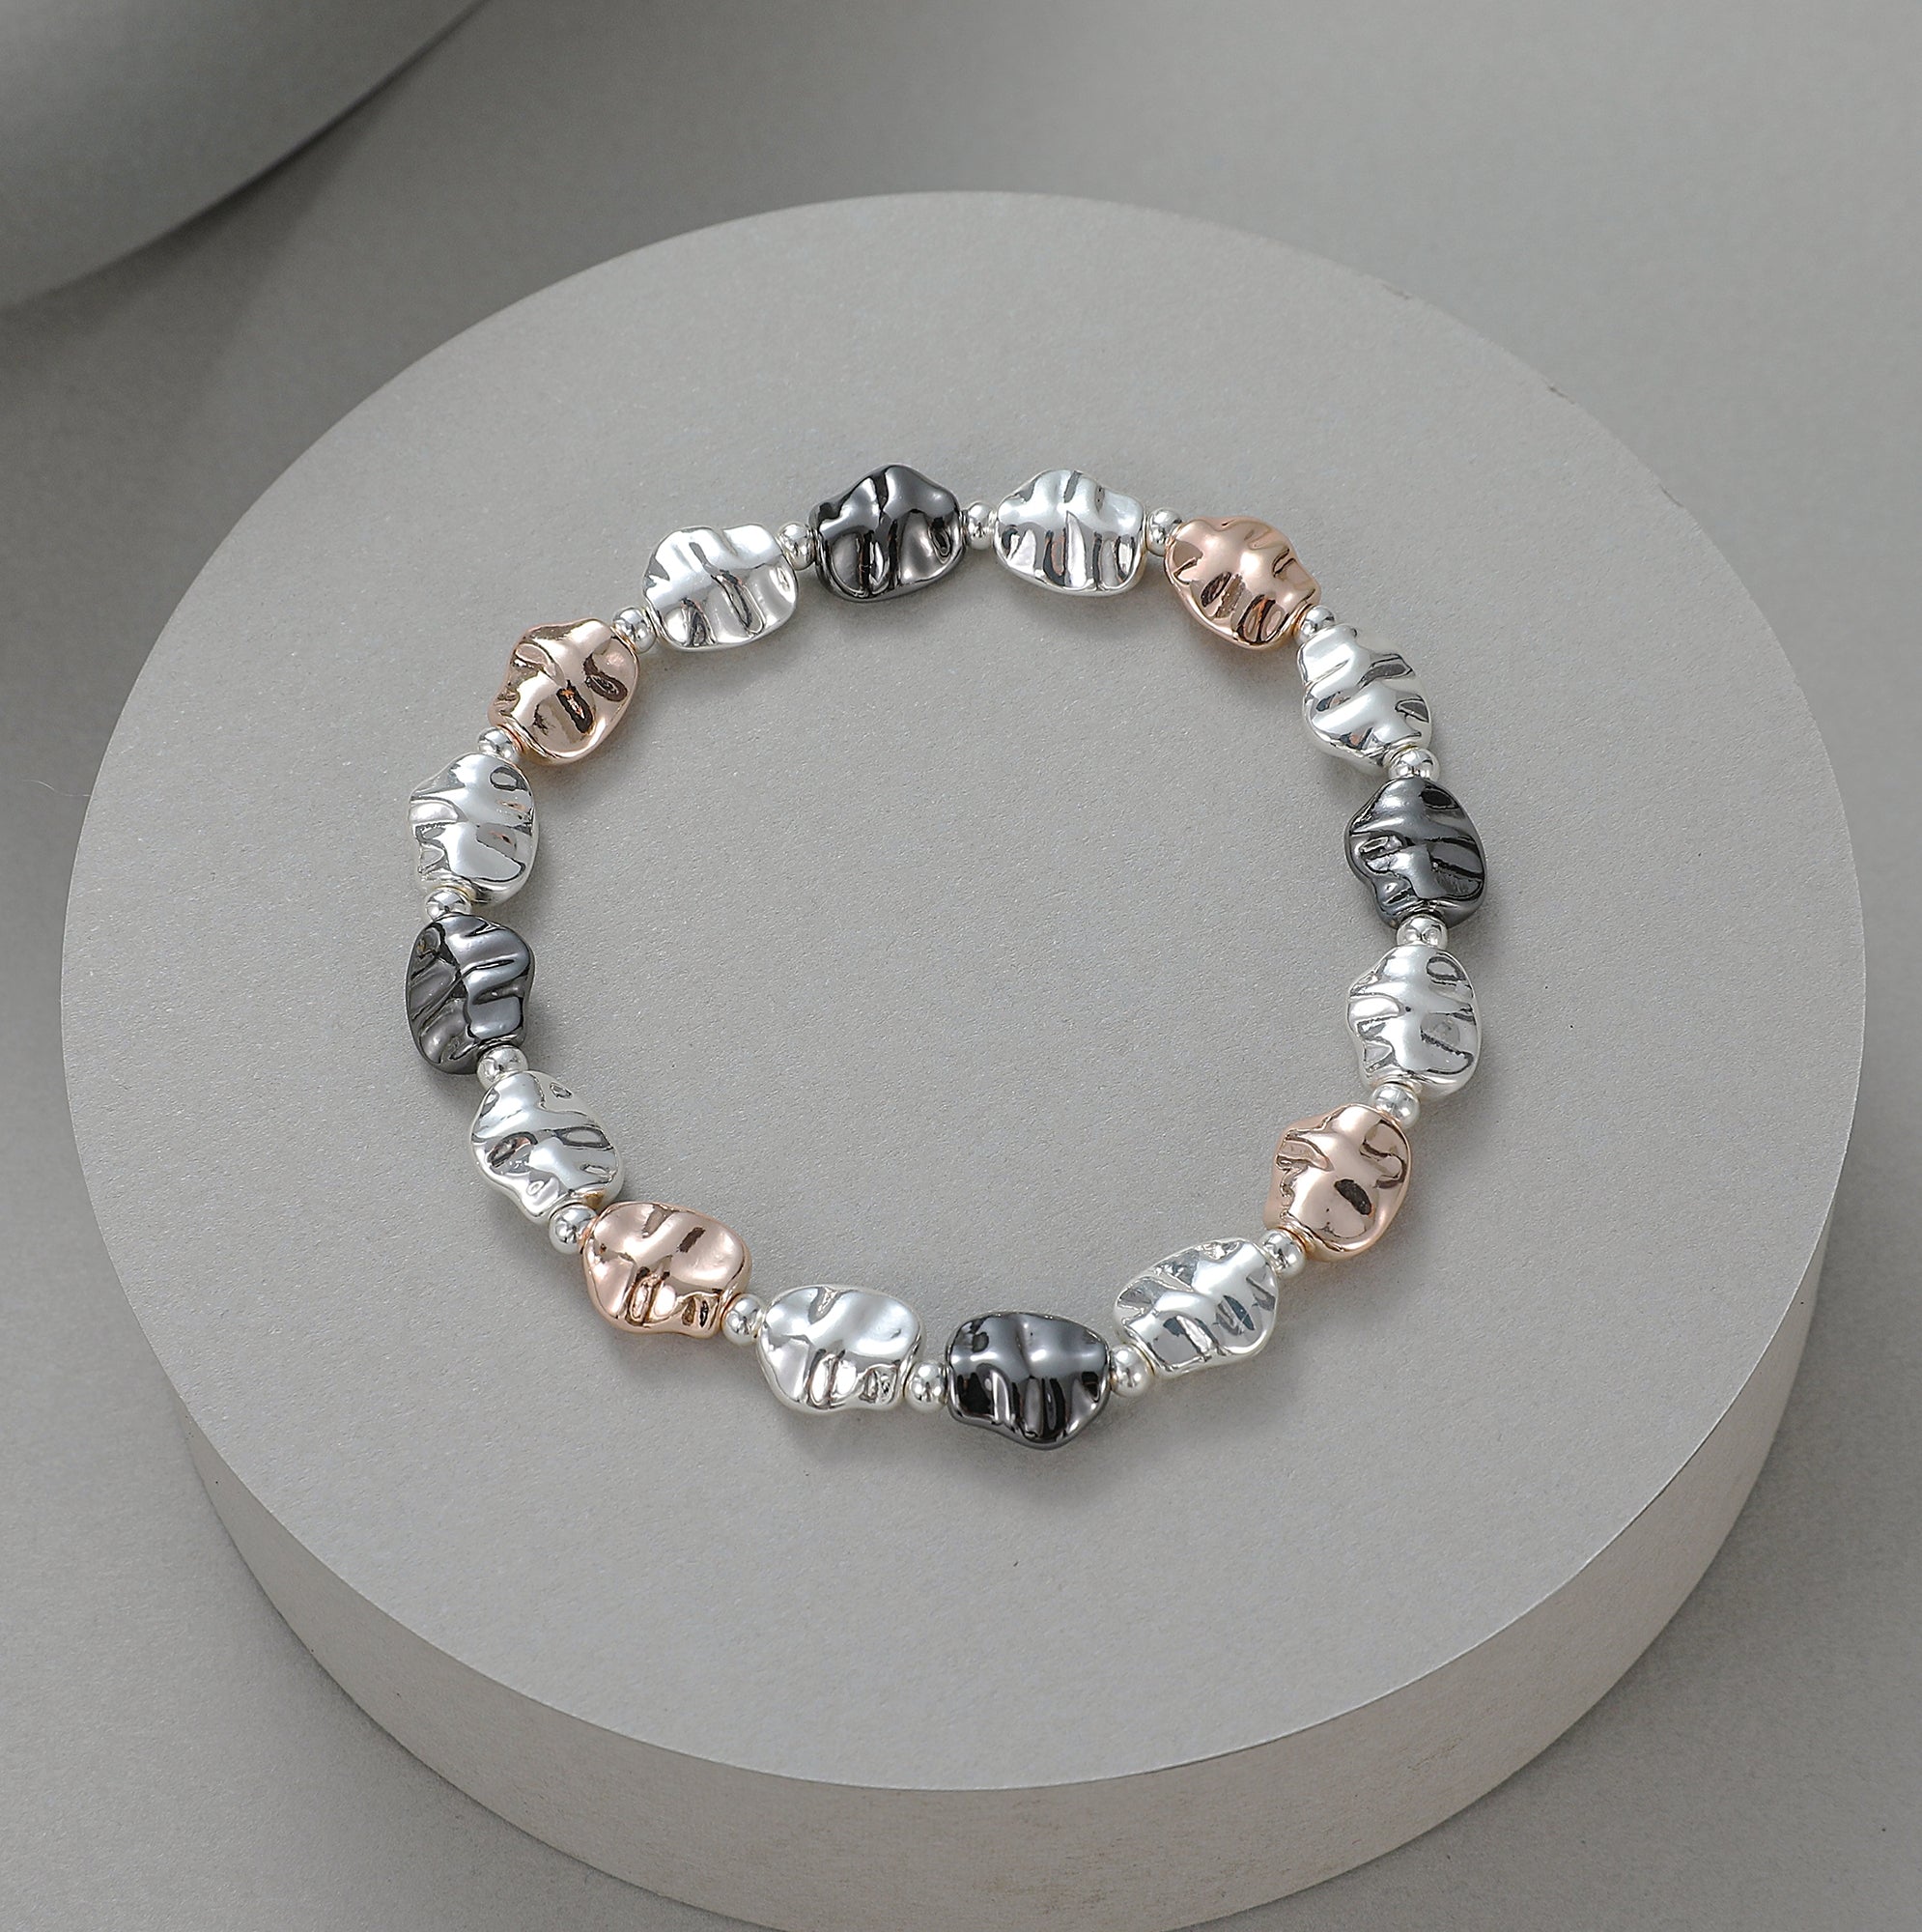 Elasticated bracelet with matte silver, shiny silver, rose and pewter battered circular stations